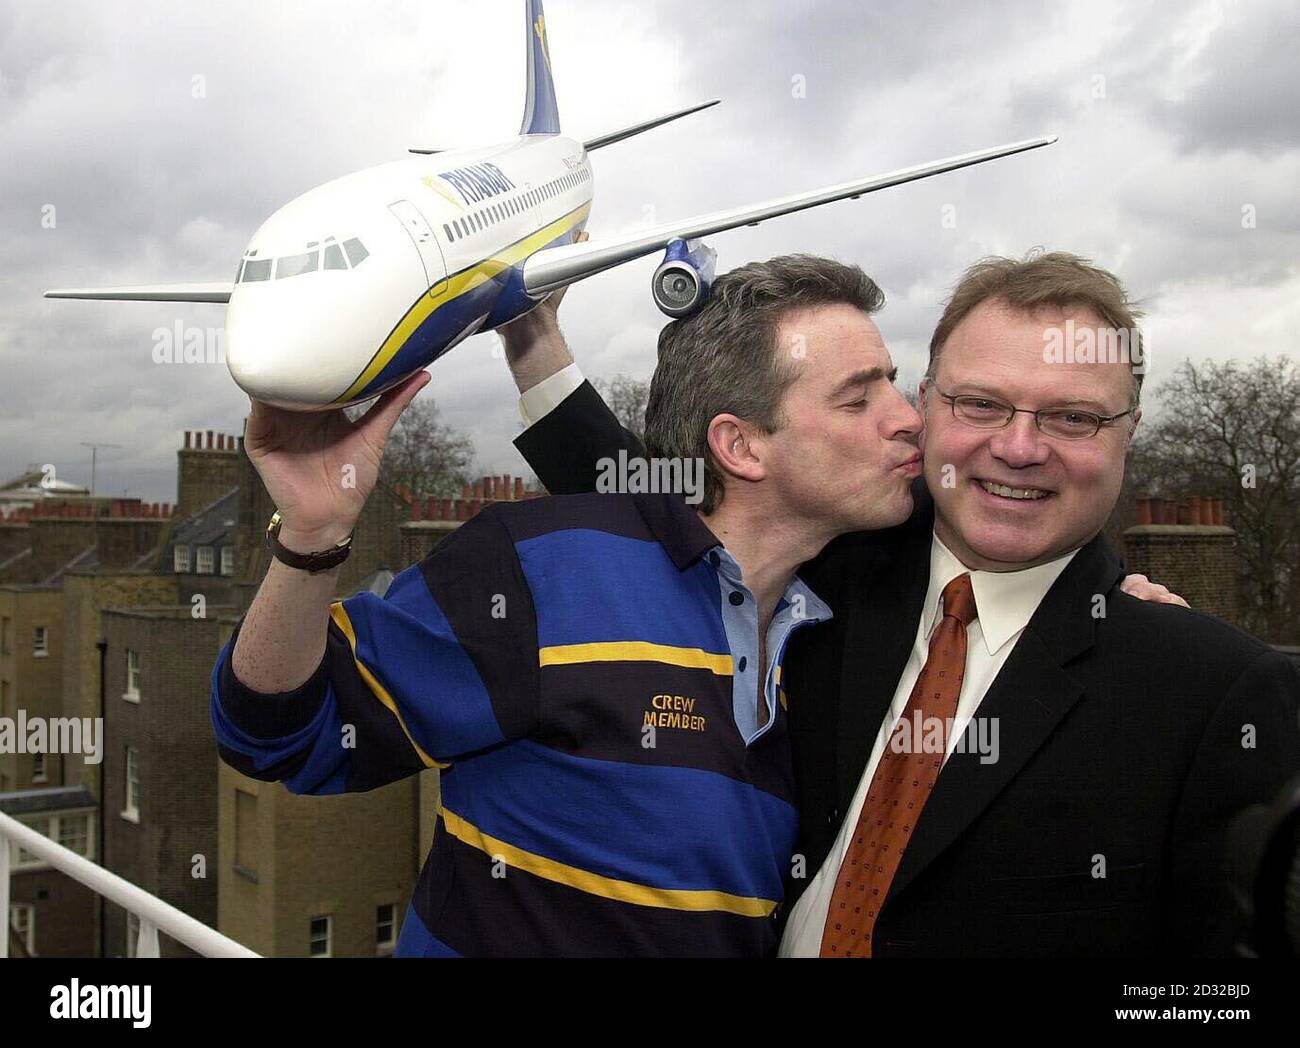 (Left) Chief Executive of Ryanair Michael O'Leary holds a model of the Boeing 737-800 as he plants a kiss on the cheek of Boeing's Executive Vice President of Sales Toby Bright. *Irish-based low-cost carrier Ryanair announced today that it would buy 100 Boeing 737s, with an option for 50 more, taking delivery of the first this year and the last in 2010. Ryanair, which along with other low-cost carriers in Britain, has defied gloomy post-September 11 predictions in the aviation sector, said it would spend a total of 6.5 billion ($9.5 billion) for a total of 150 new aircraft. Stock Photo